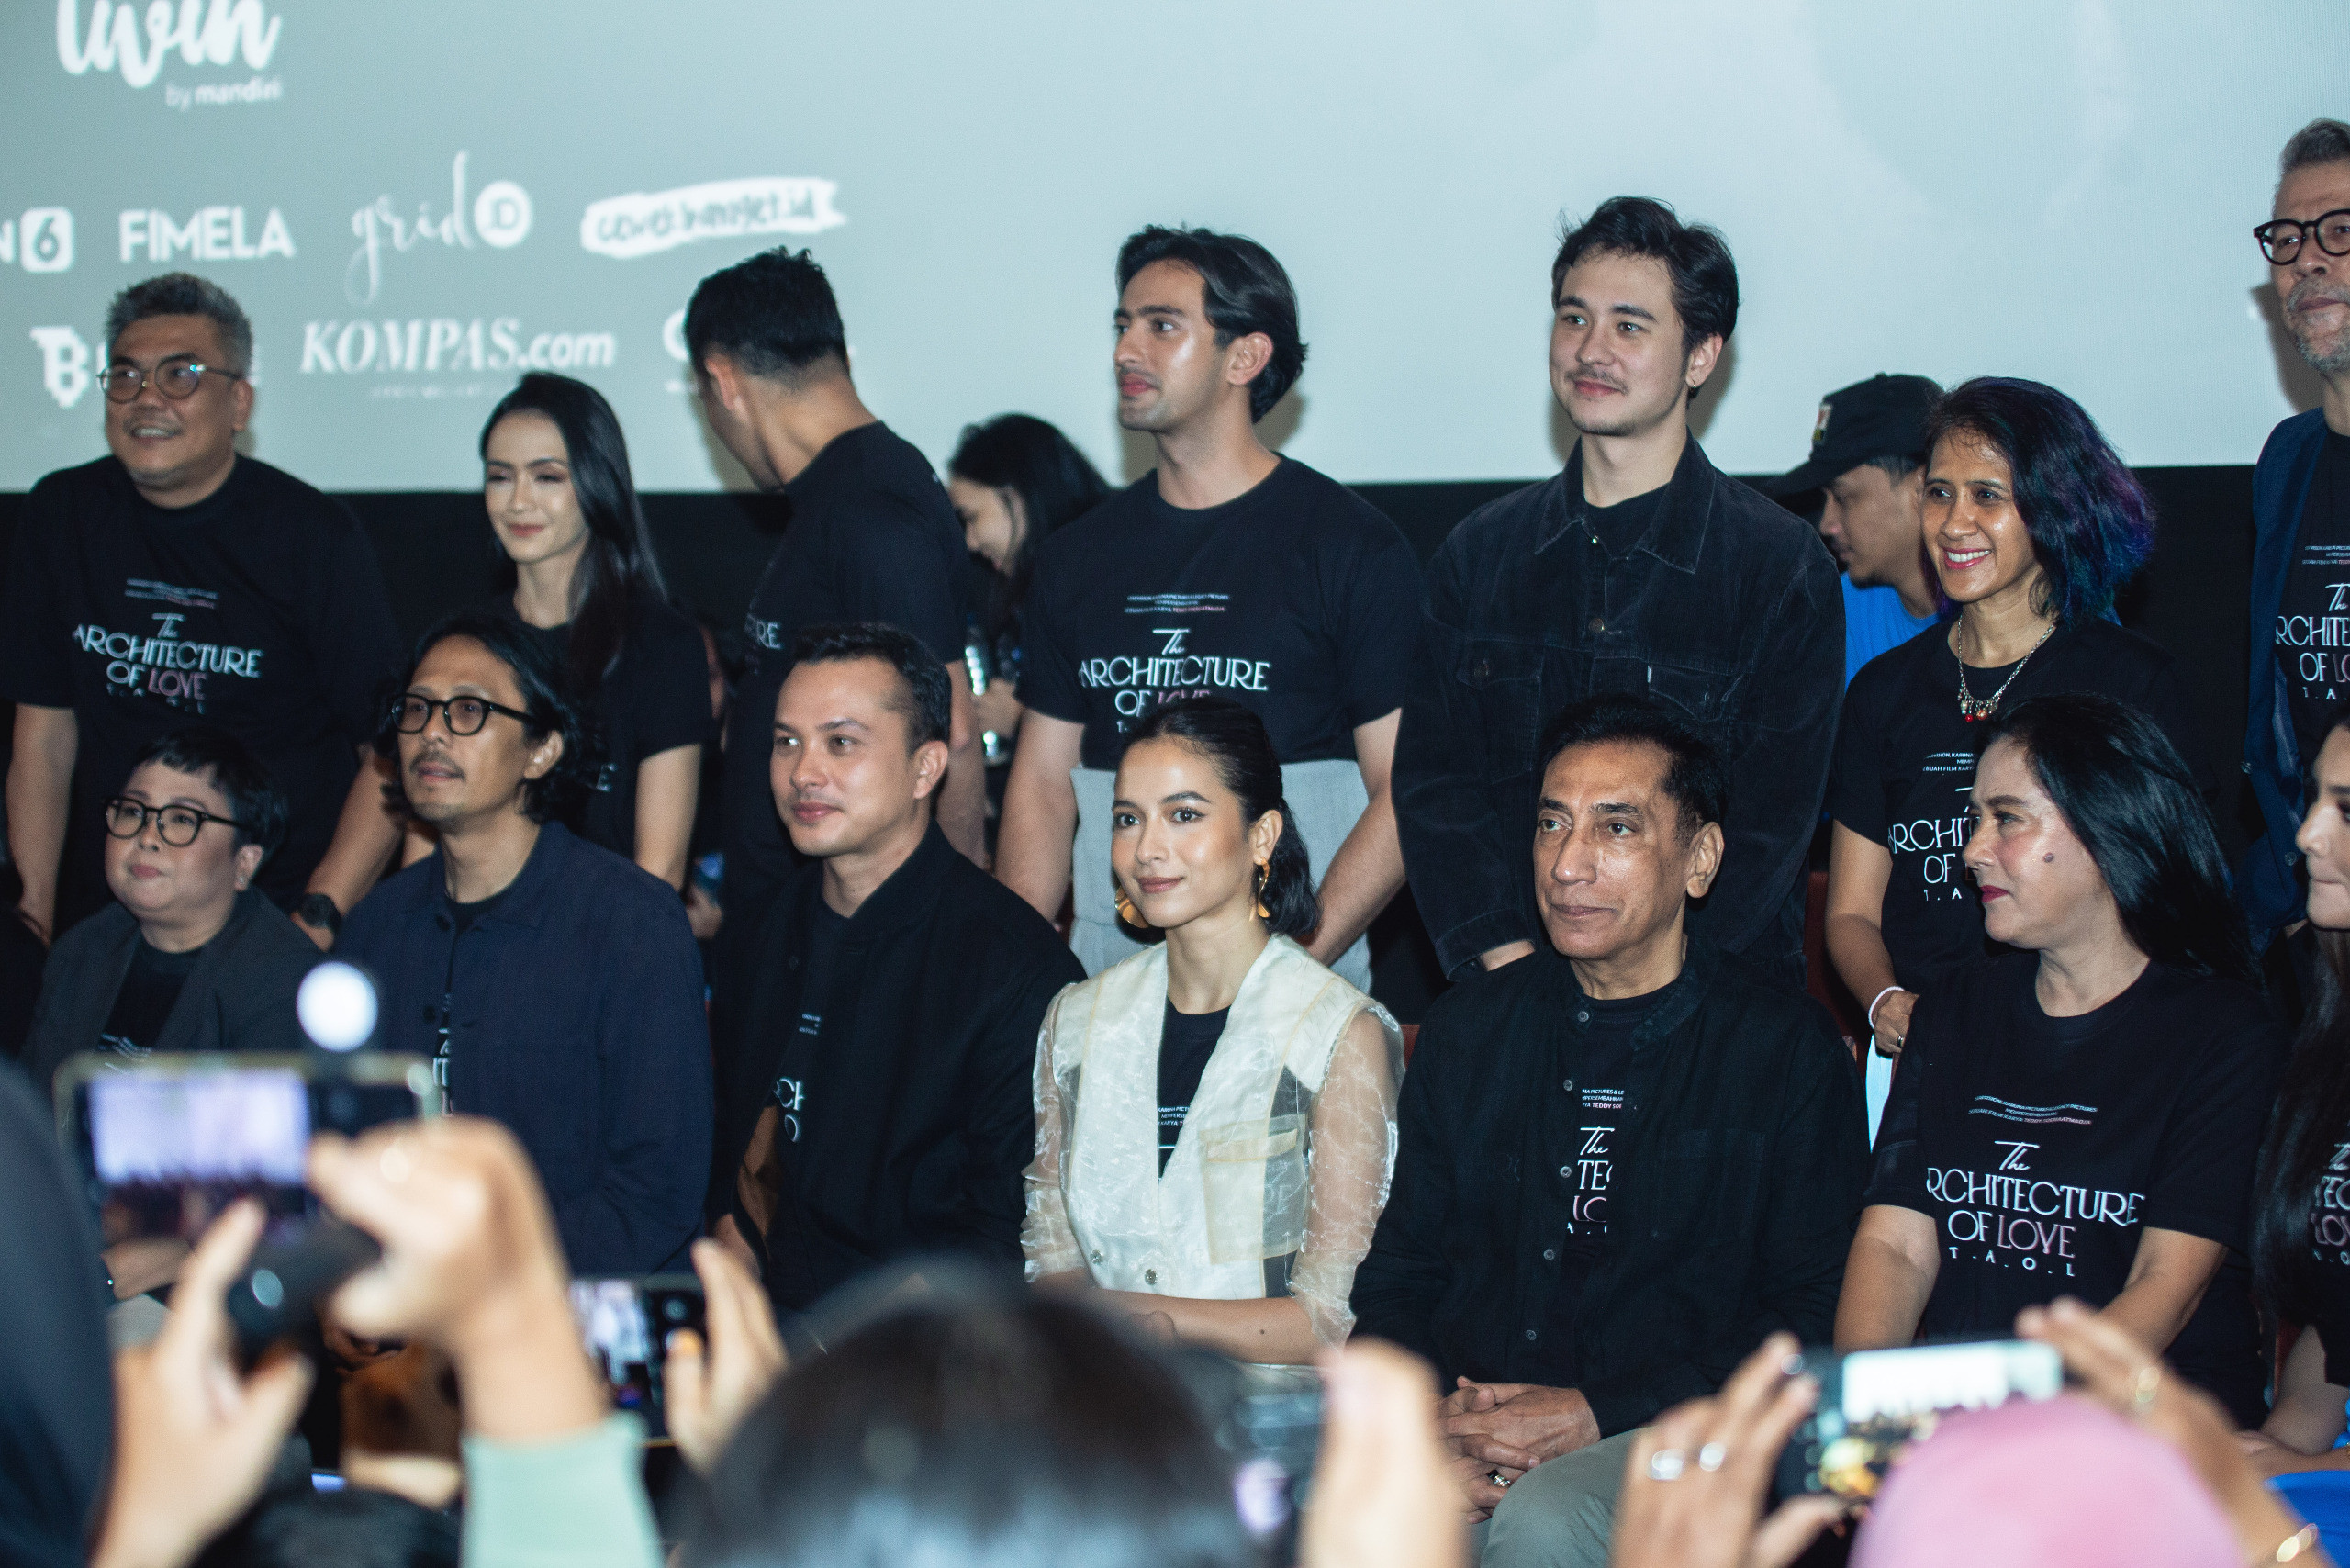 Kampanyekan Reach Your Happy Place, Oriflame Hadir Dalam "The Architecture Of Love"